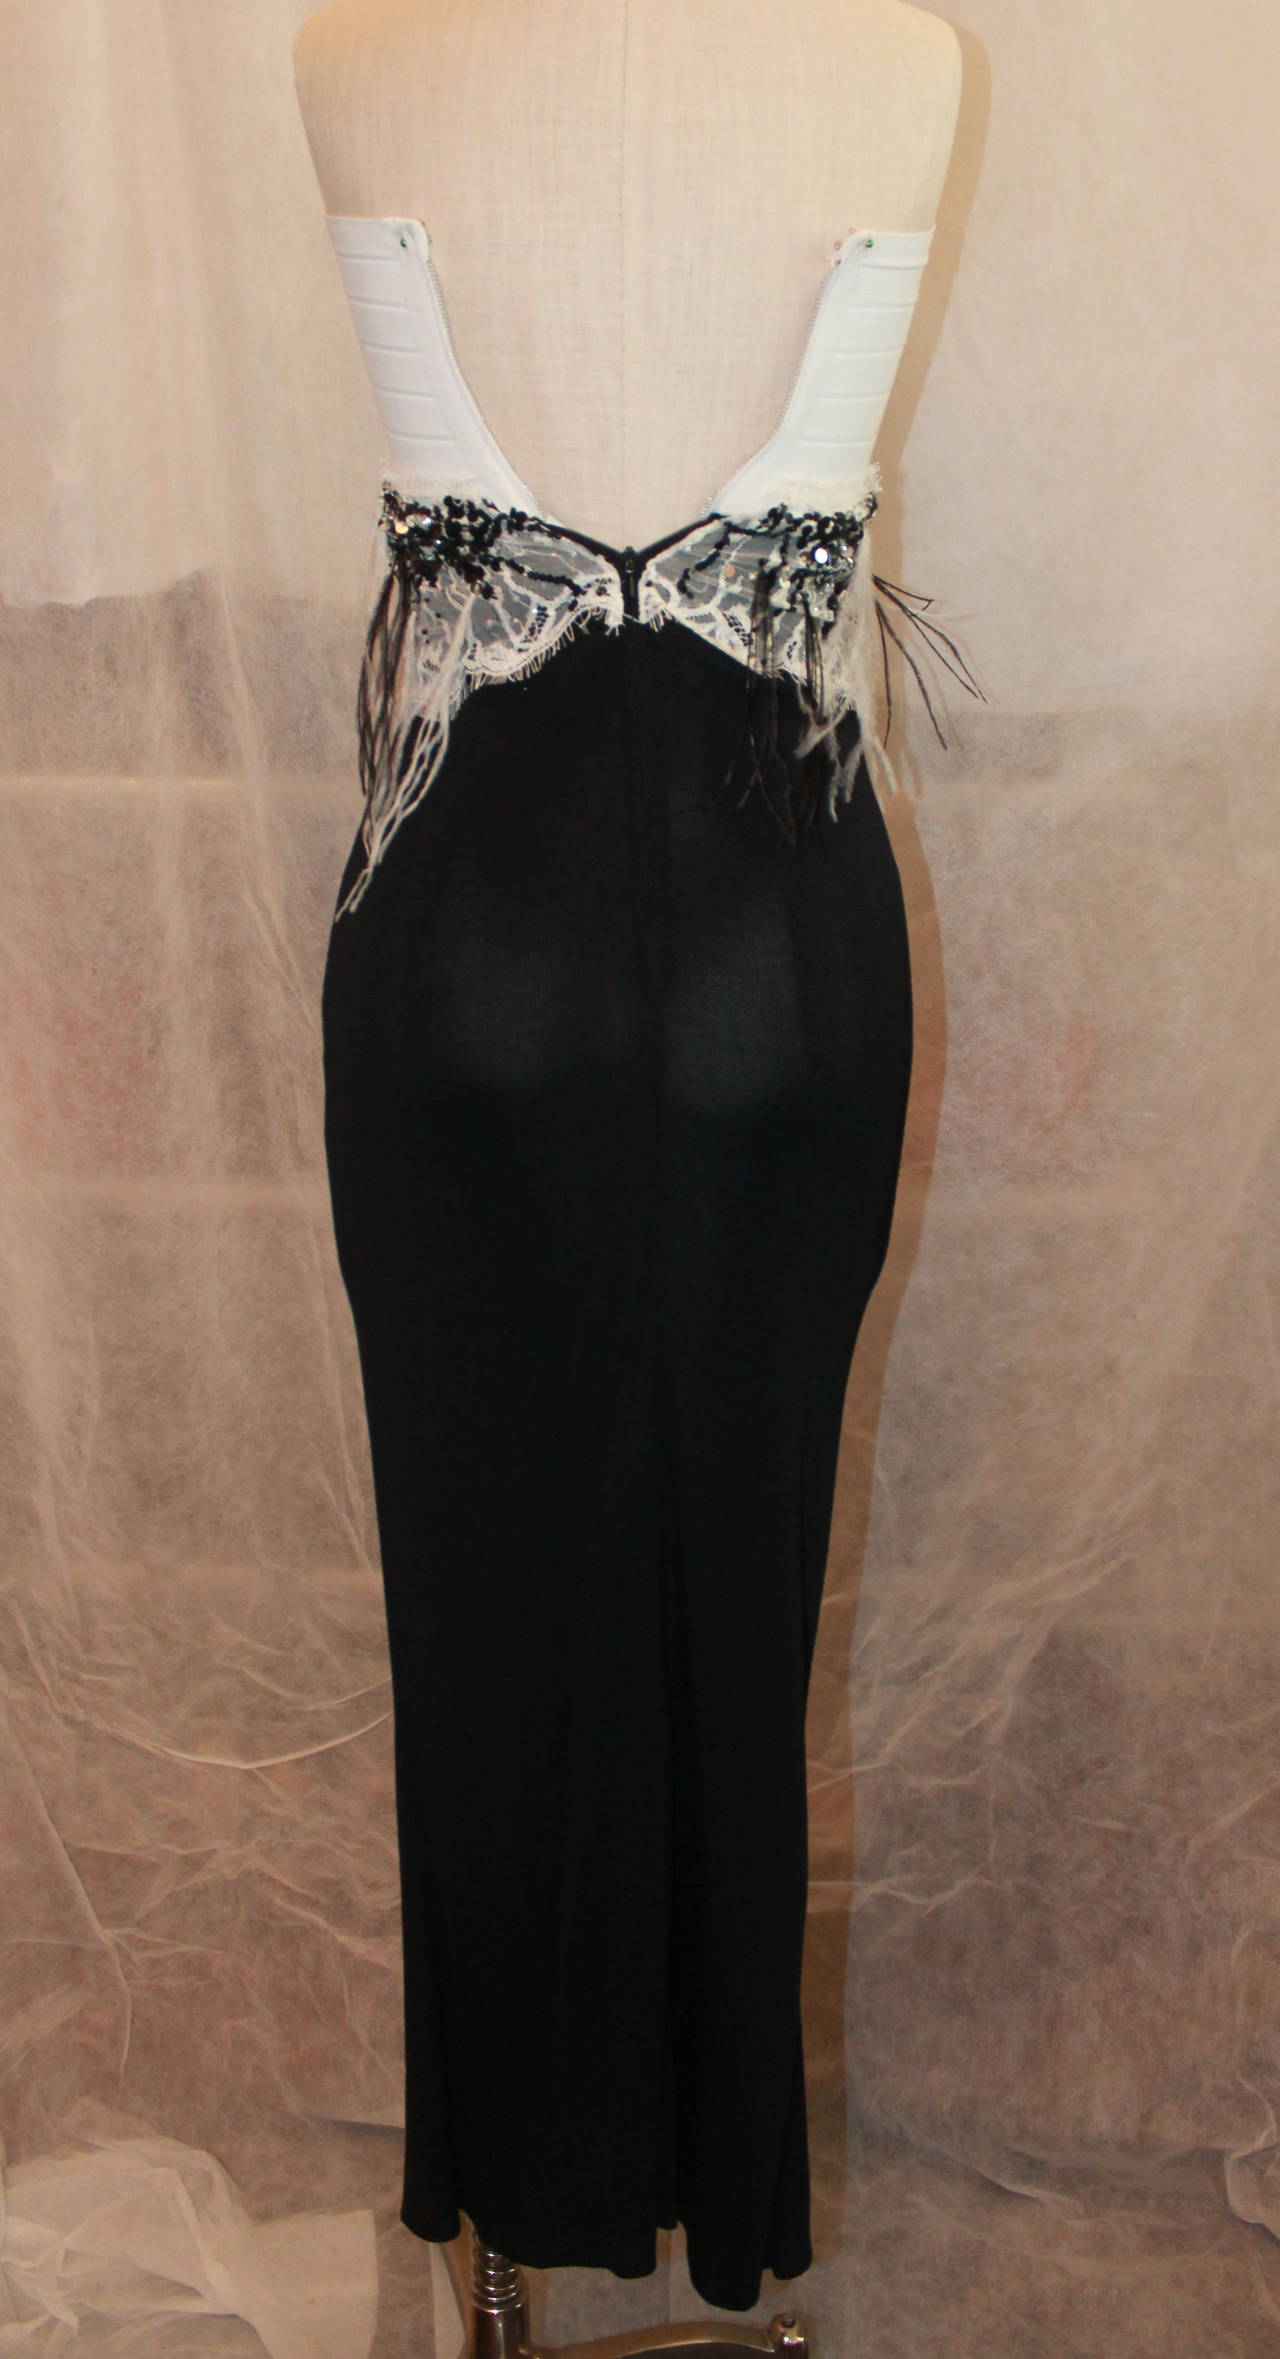 Herve Leger Strapless Black & White Gown with Sequins & Feathers - 2 1